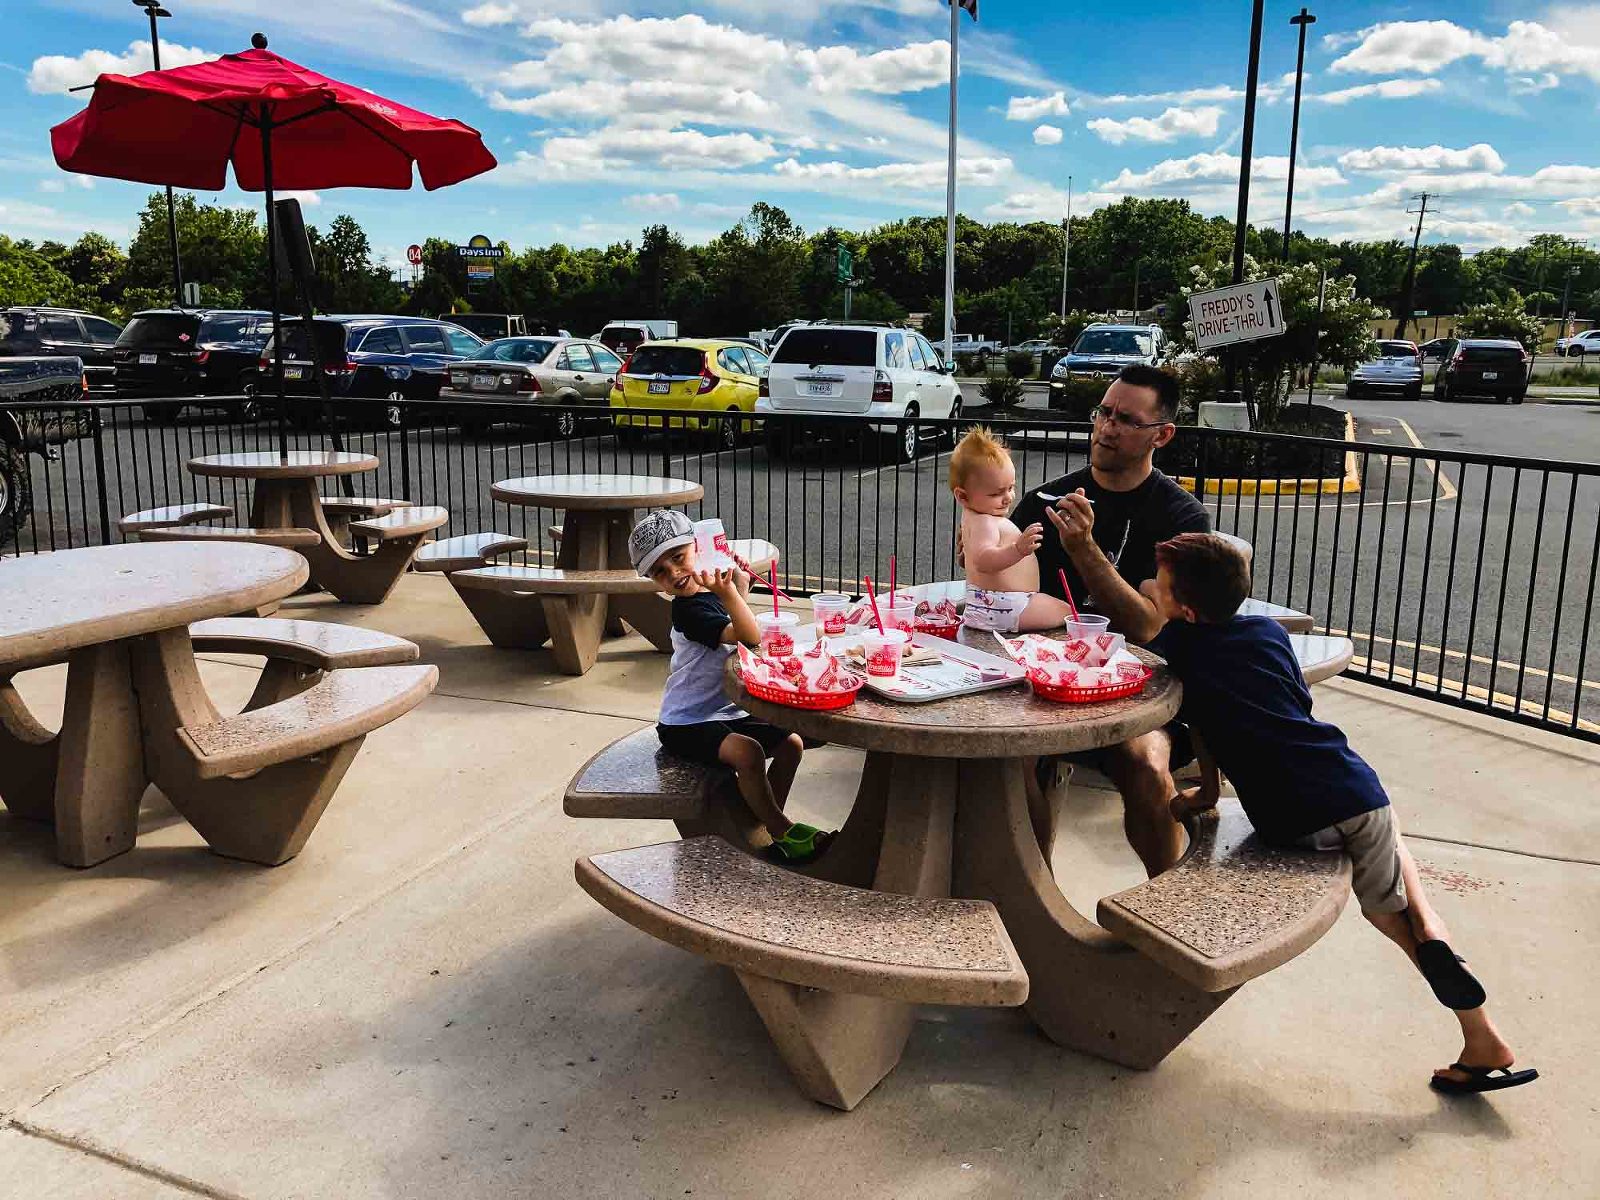 dad and three kids sit at a concrete picnic table outside a fast food restaurant, surrounded by parking lot, feeding a baby sitting on the table